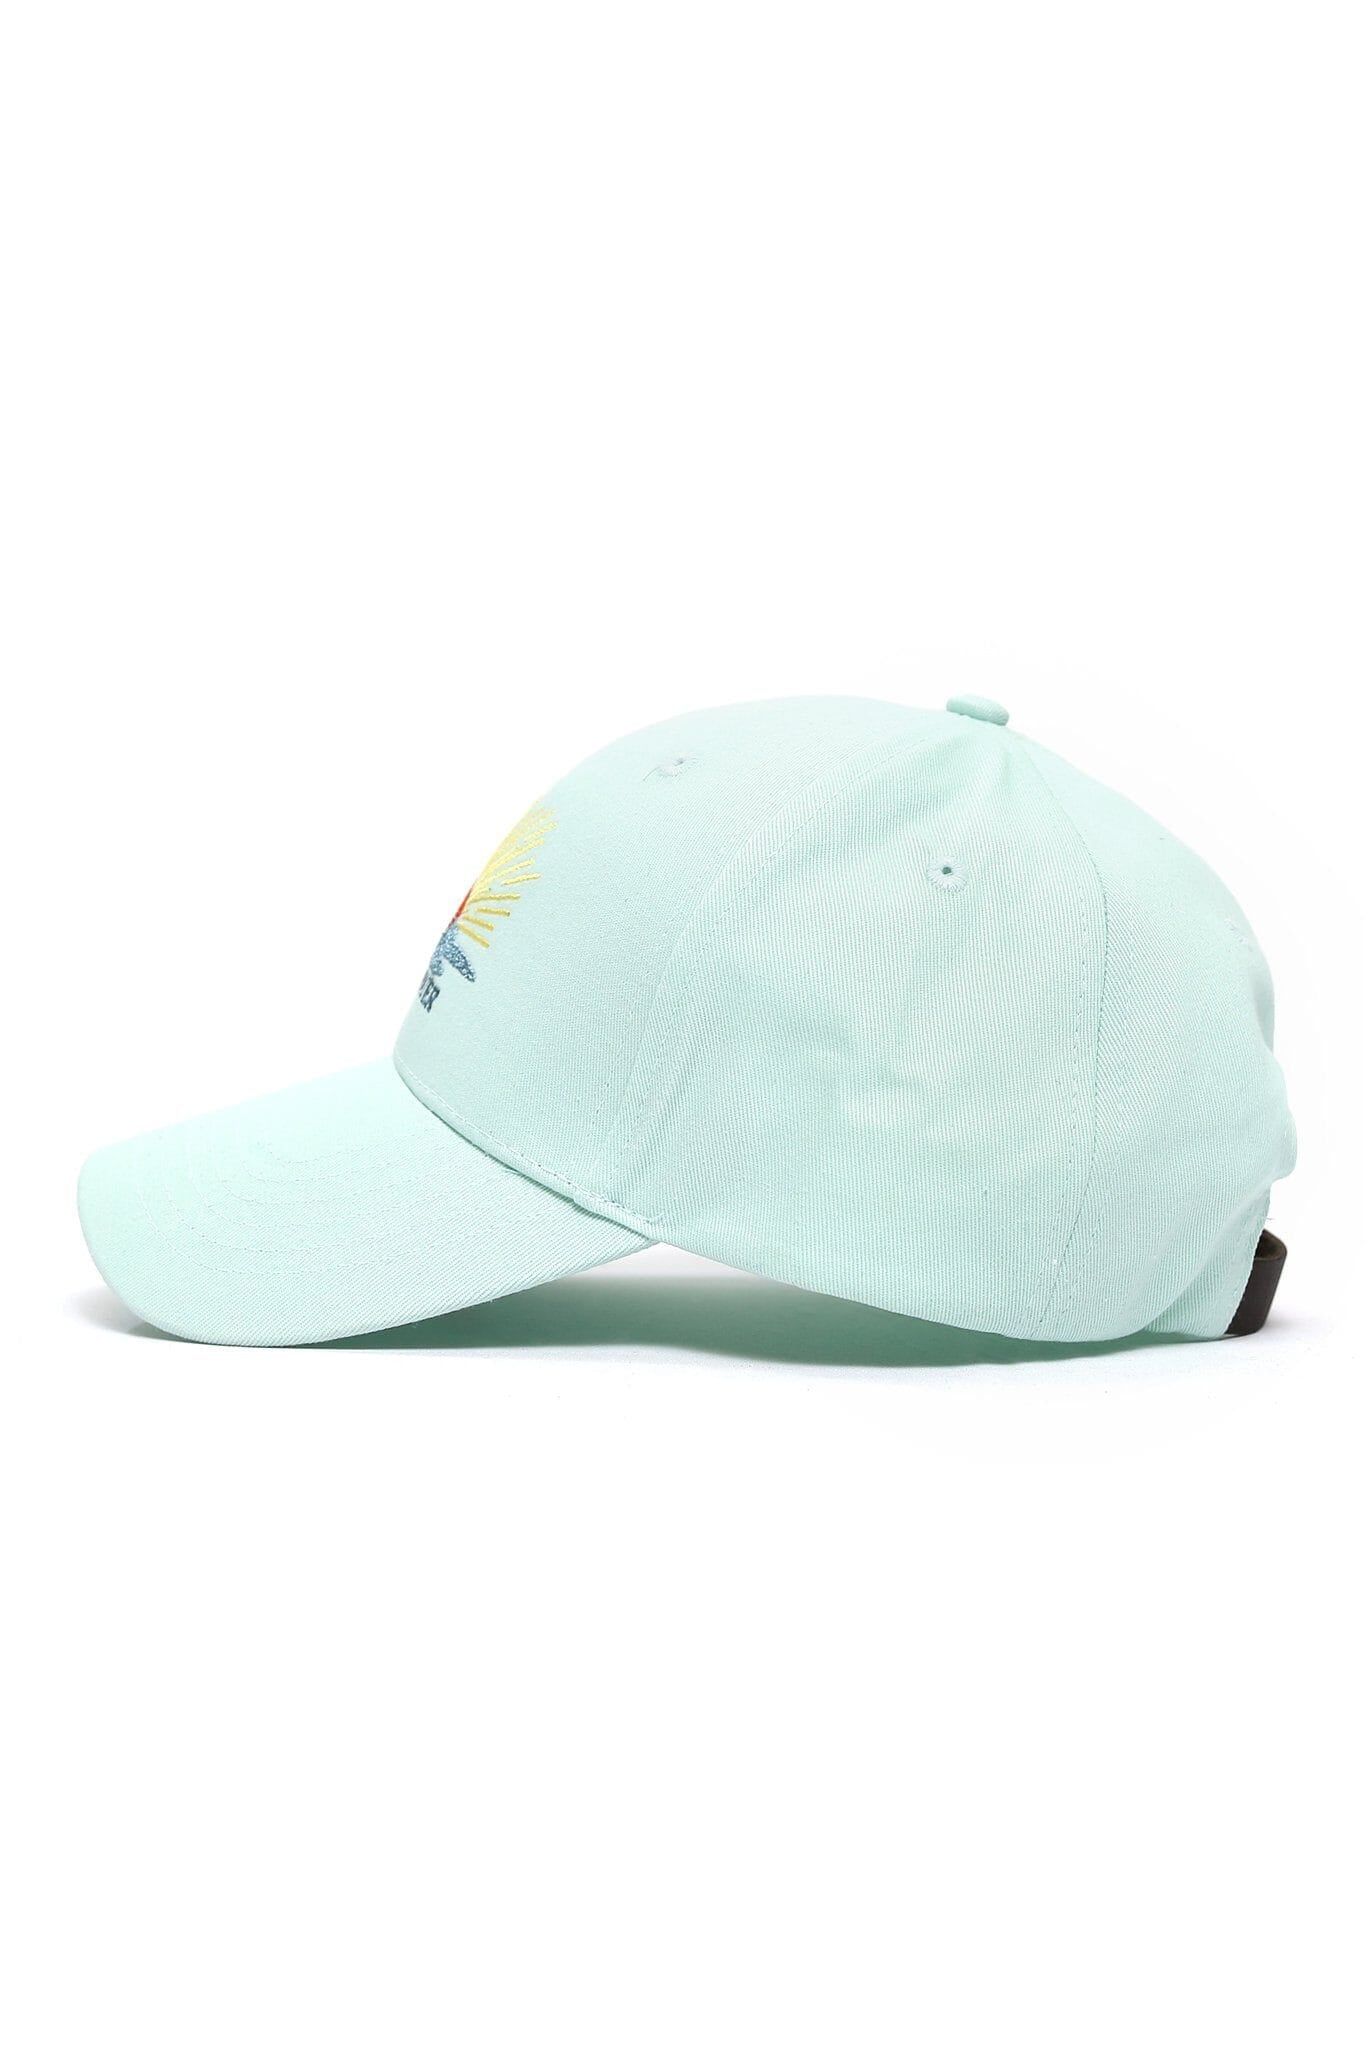 BORN BY WATER SUNSET CAP - G-GREEN - OS